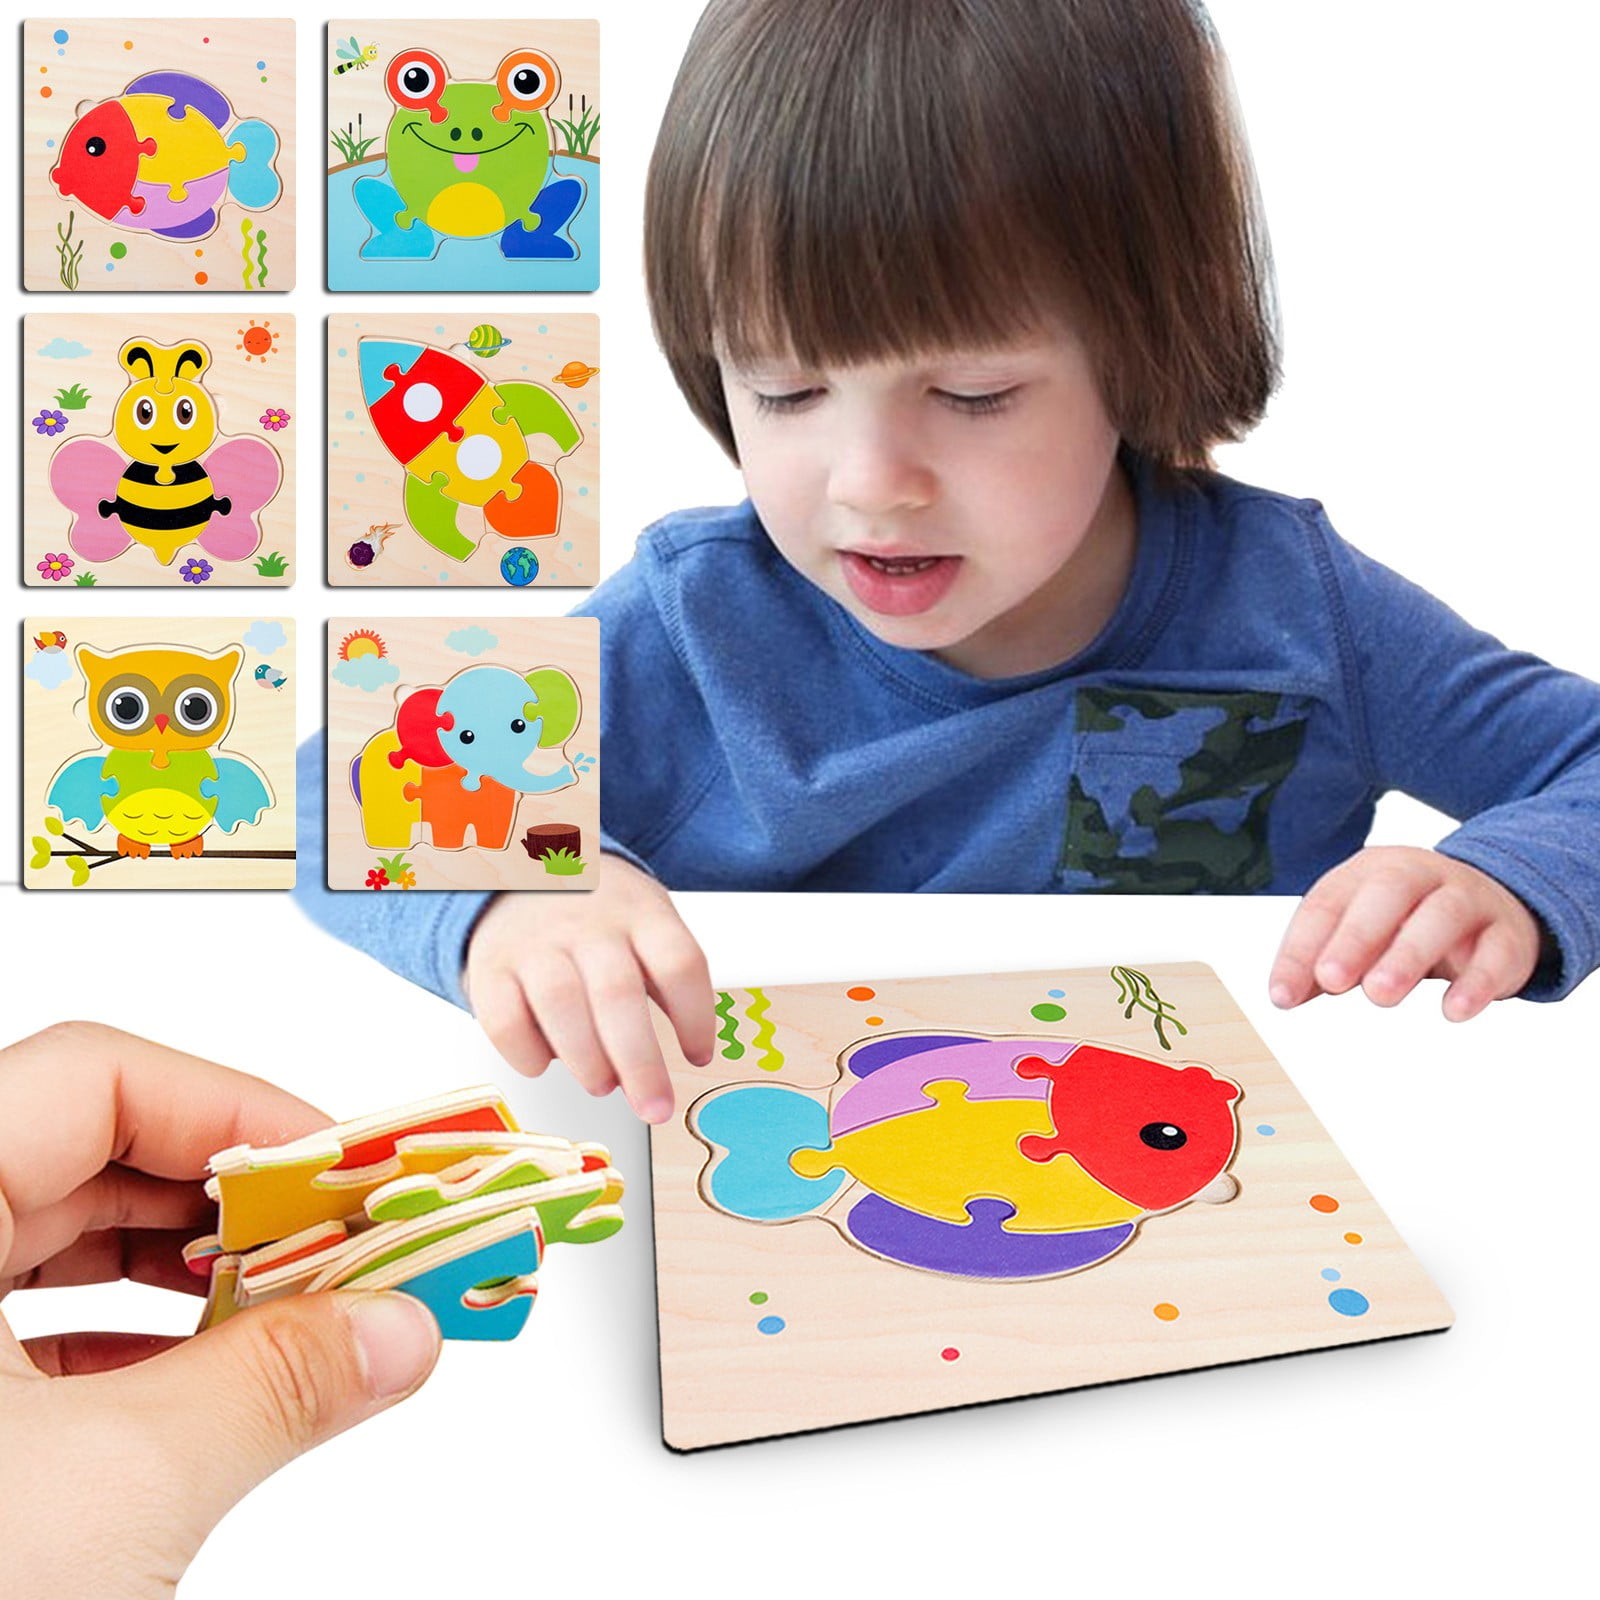 Children Toys Wooden Puzzles for Toddlers and Kids 1 2 3 Year Old Boy and Girl 